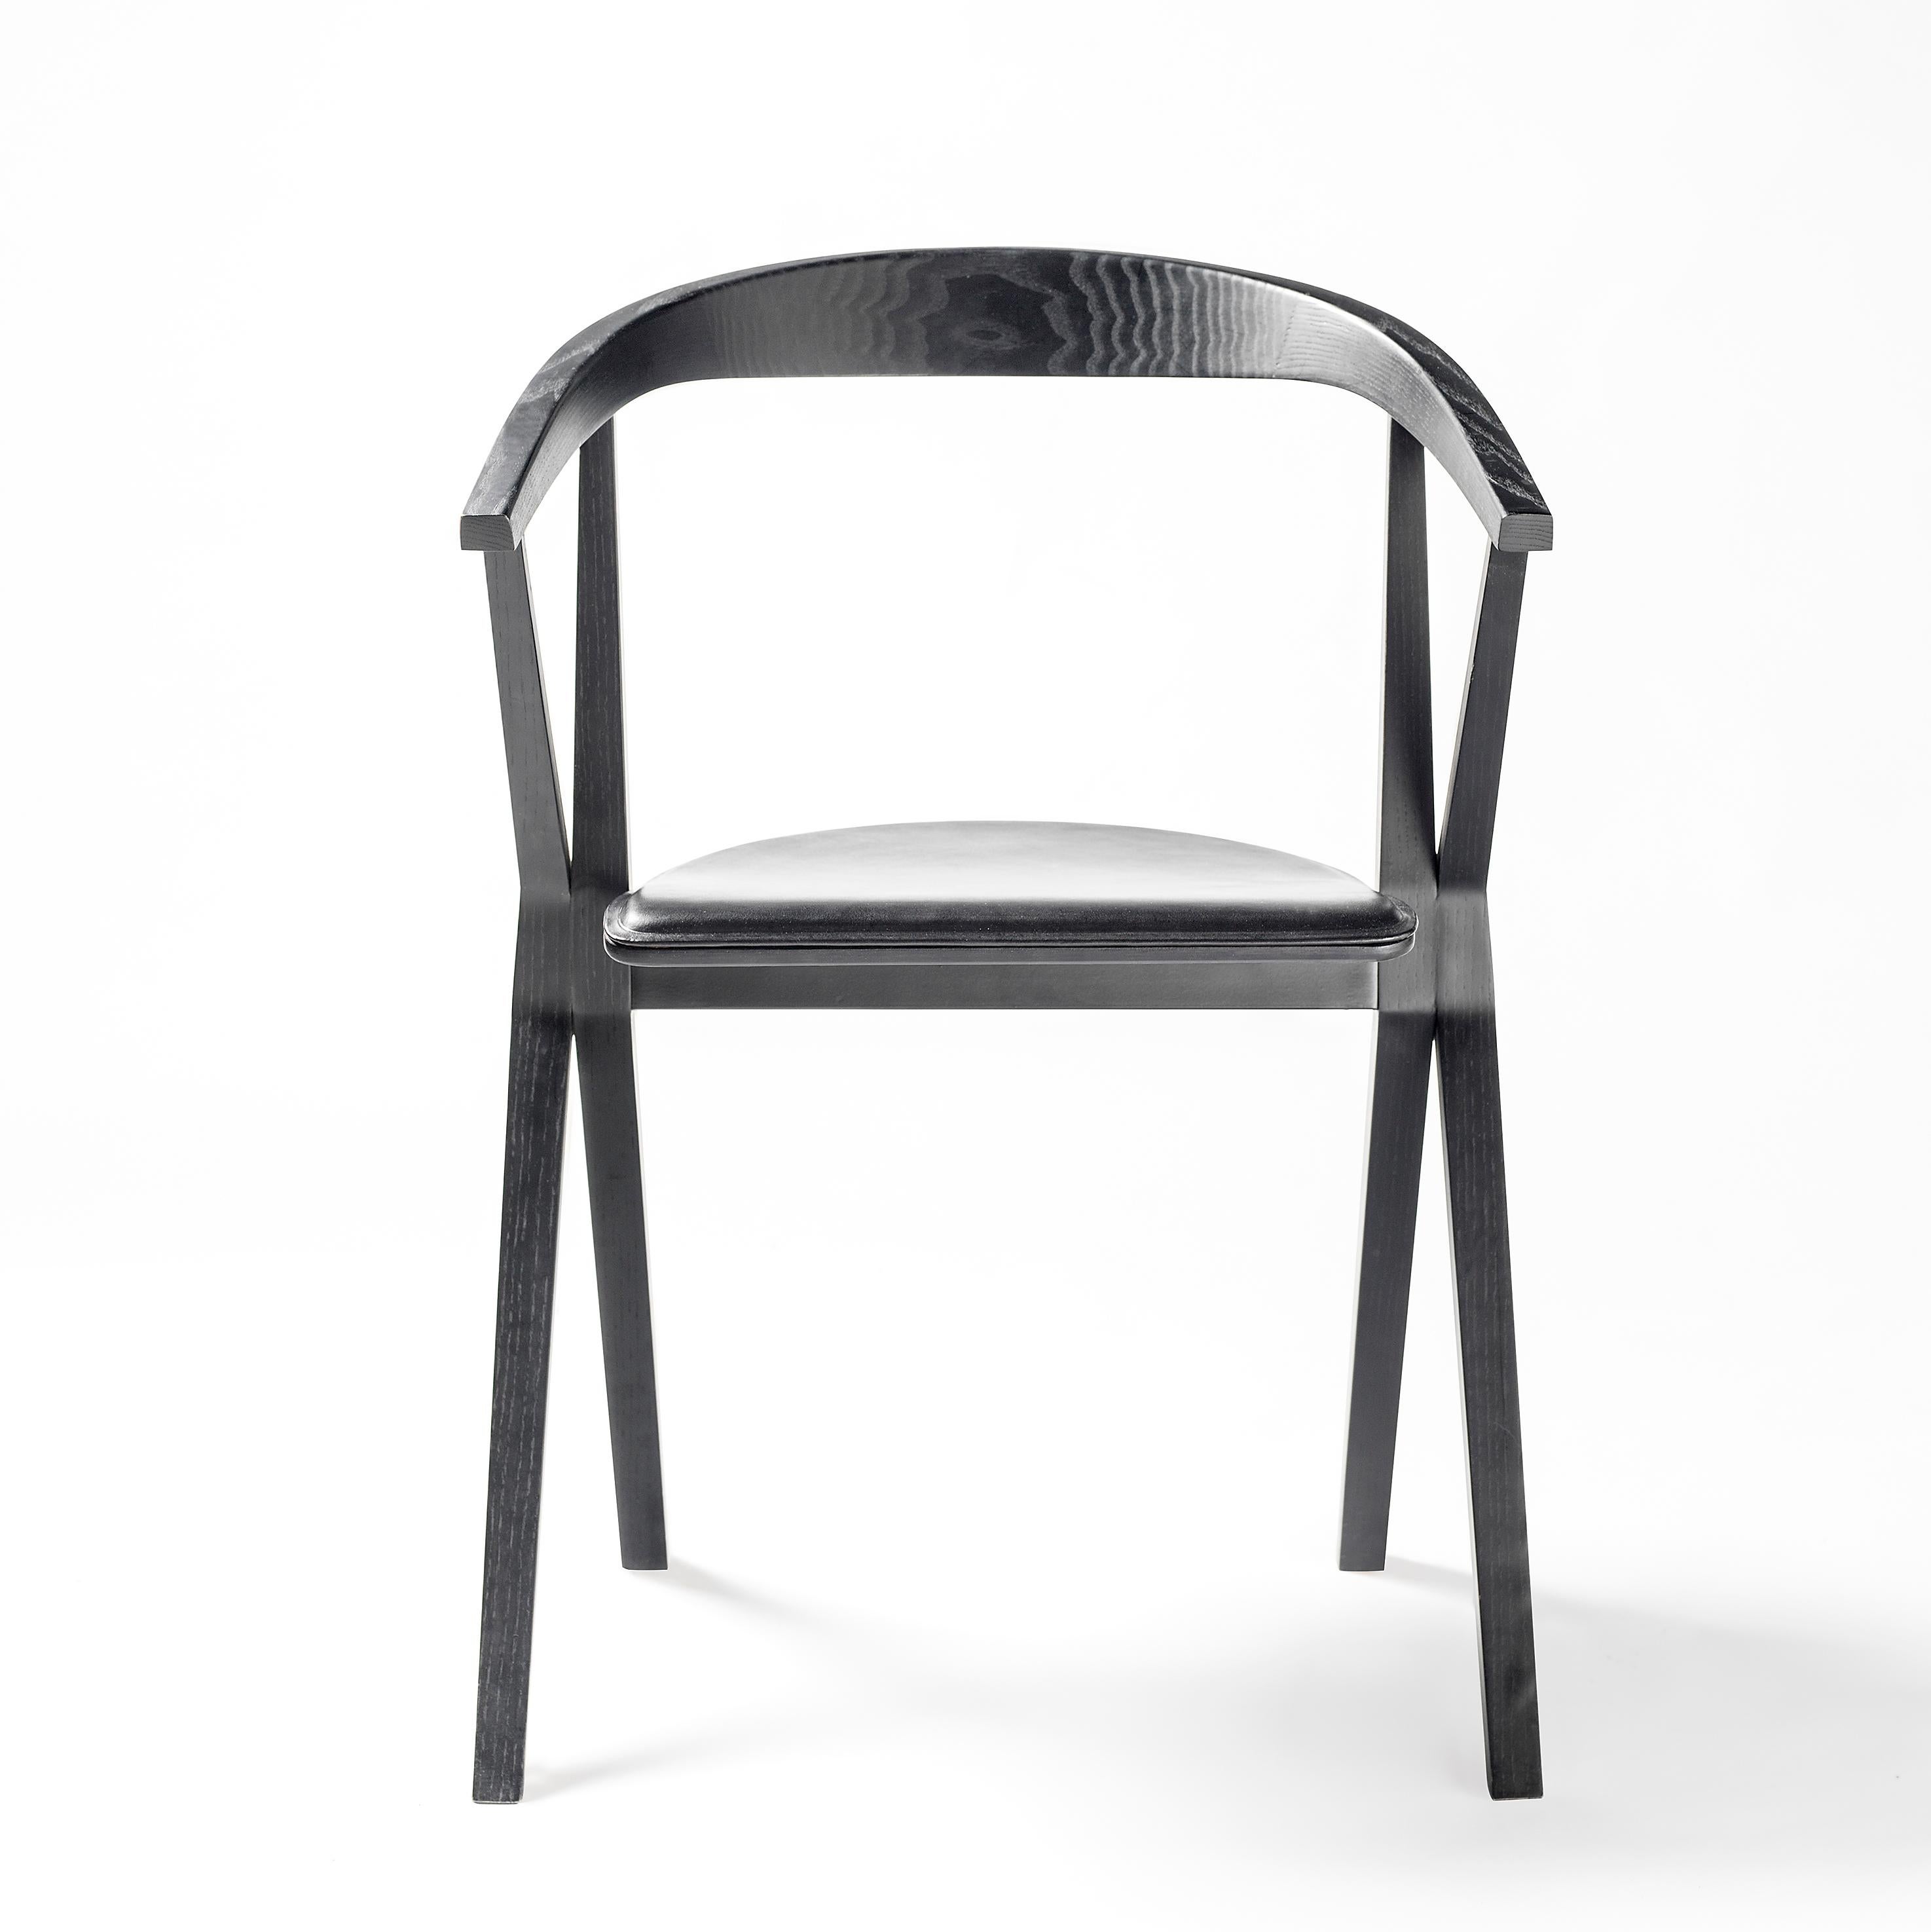 This chair won the ADI-FAD Delta Silver Award in 2011. In its singularity, complex engineering is hidden. The very fact that the seat can be folded up opens the possibilities for the use of this chair in multi-use spaces.

Sides and seat are in